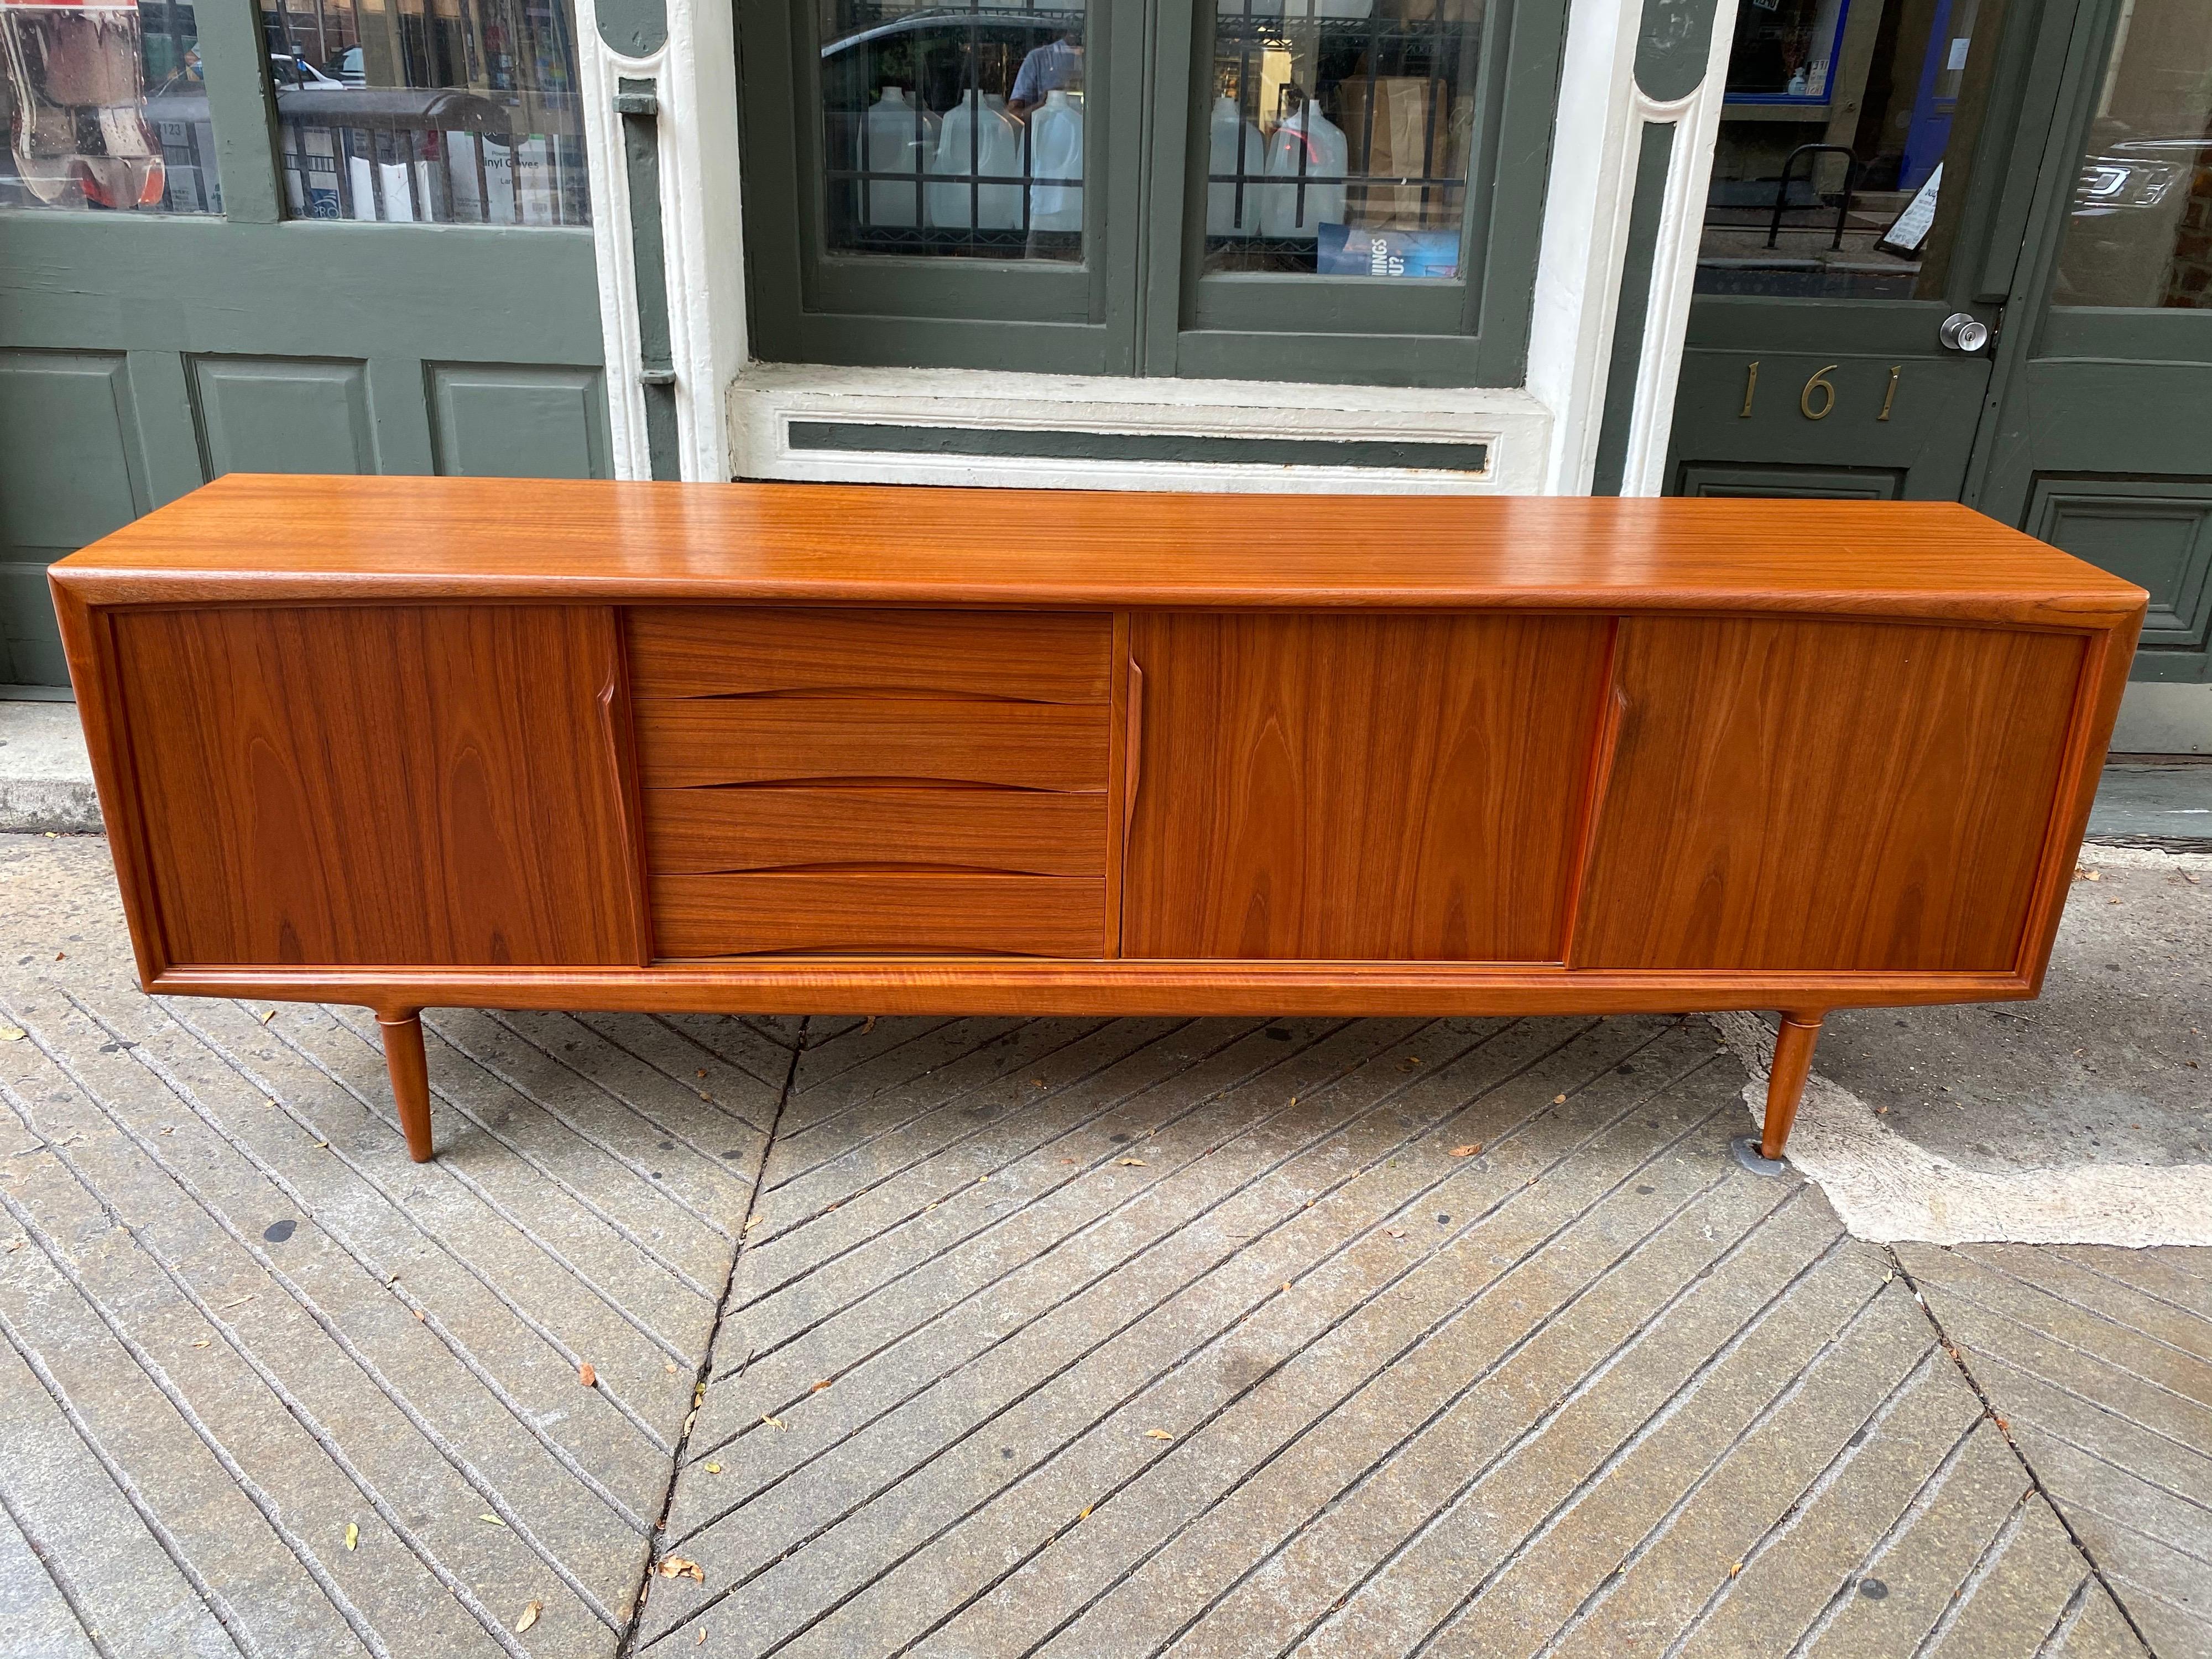 Gunni Omann teak credenza for Axel Christiansen, extra long and sleek! Beautiful credenza with sliding doors and pull out felt lined drawers in the center. Outstanding grain throughout! Quite the looker! Measures: 95